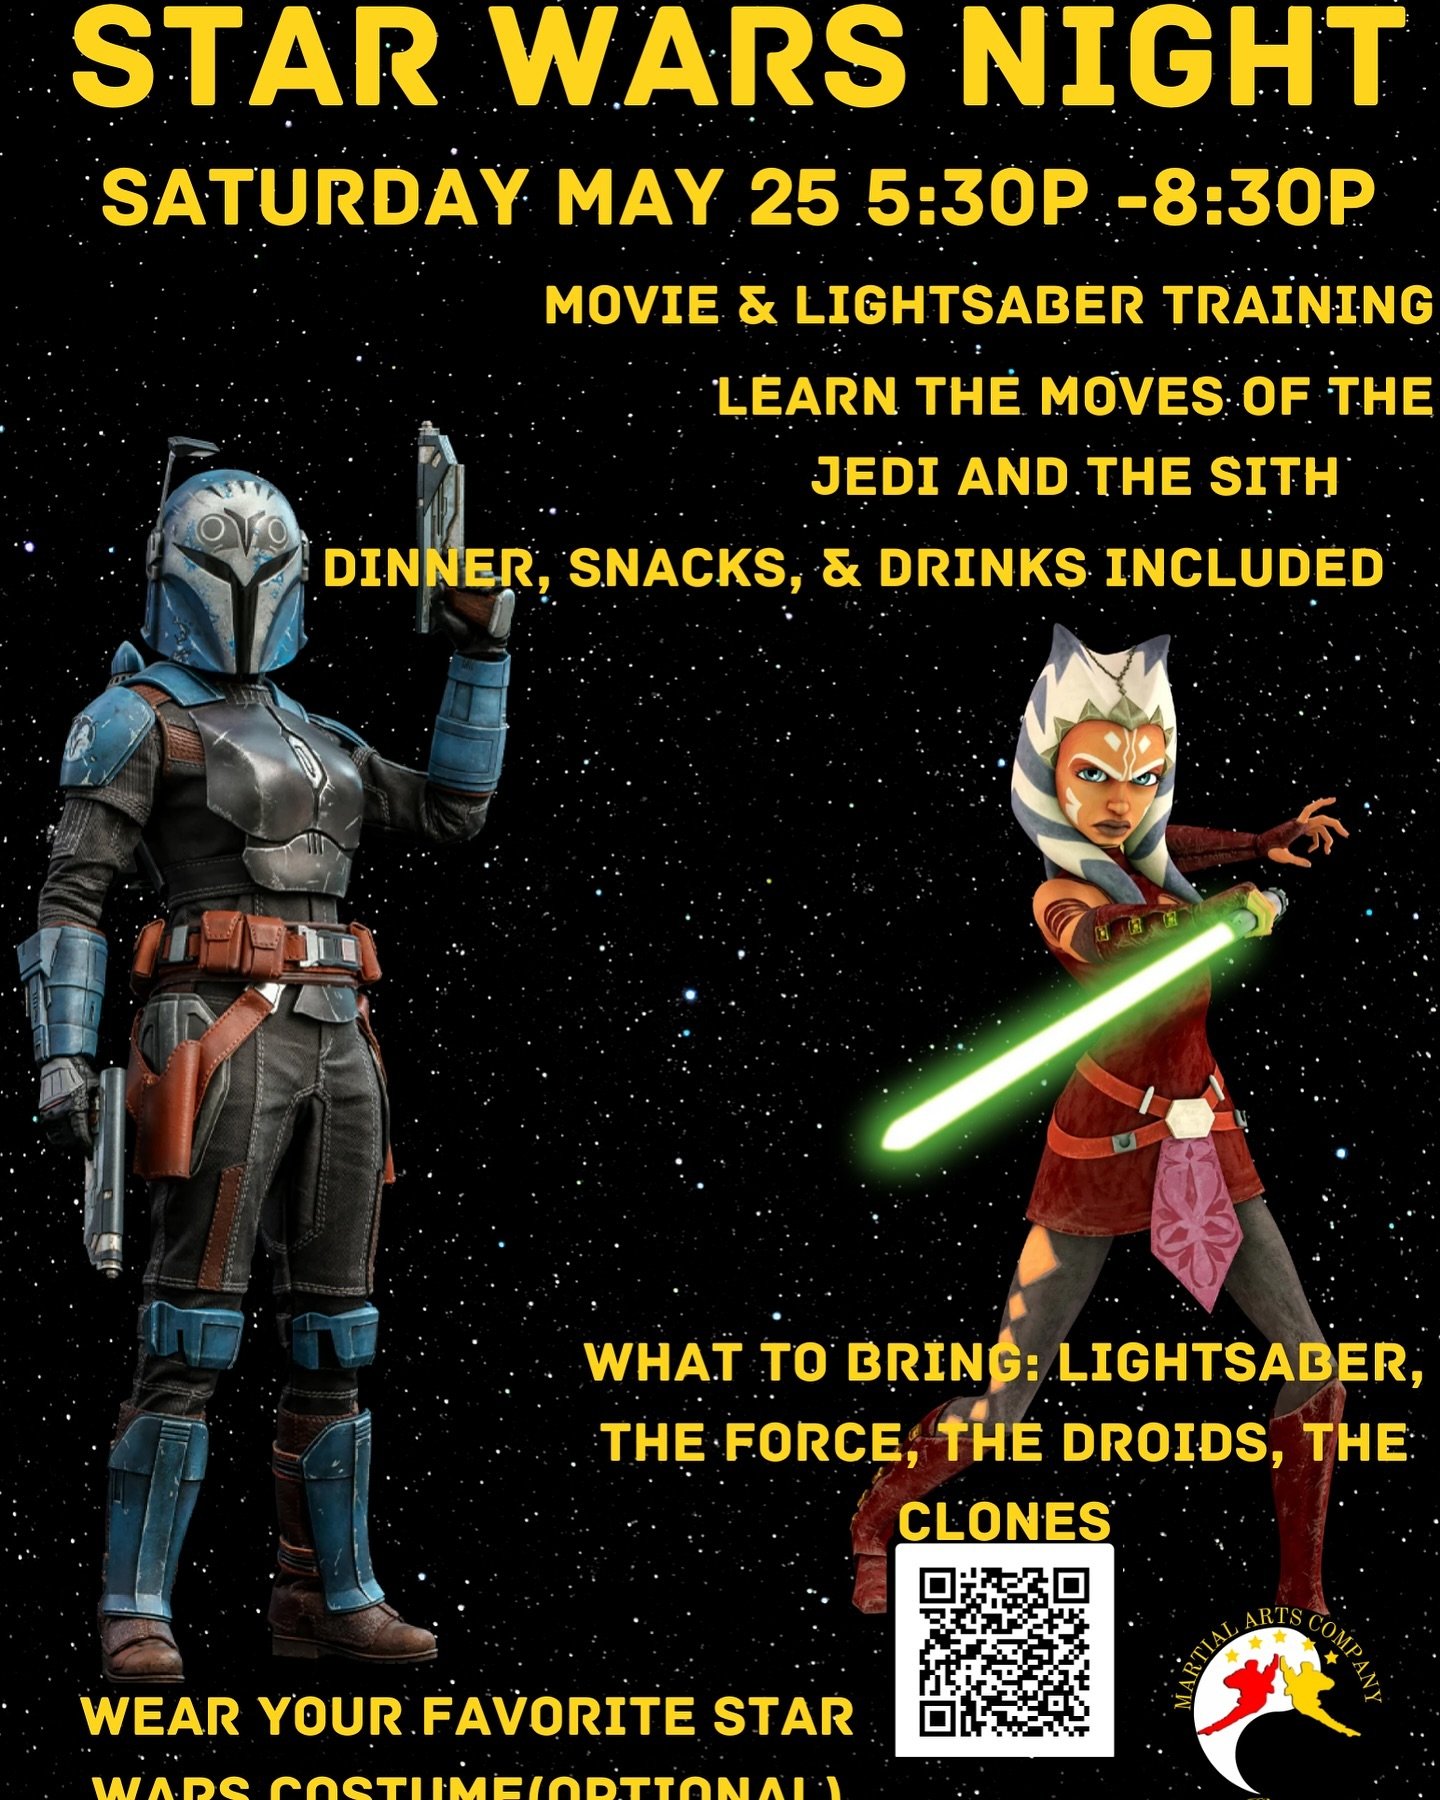 IT&rsquo;S STAR WARS DAY! MAY THE FOURTH BE WITH YOU!

As it&rsquo;s May, we&rsquo;re having another Star Wars Night. SATURDAY MAY 25th 5:30p - 8:30pWe&rsquo;ll watch some Star Wars and Learn how to use lightsabers, really bring one! If you wanna get